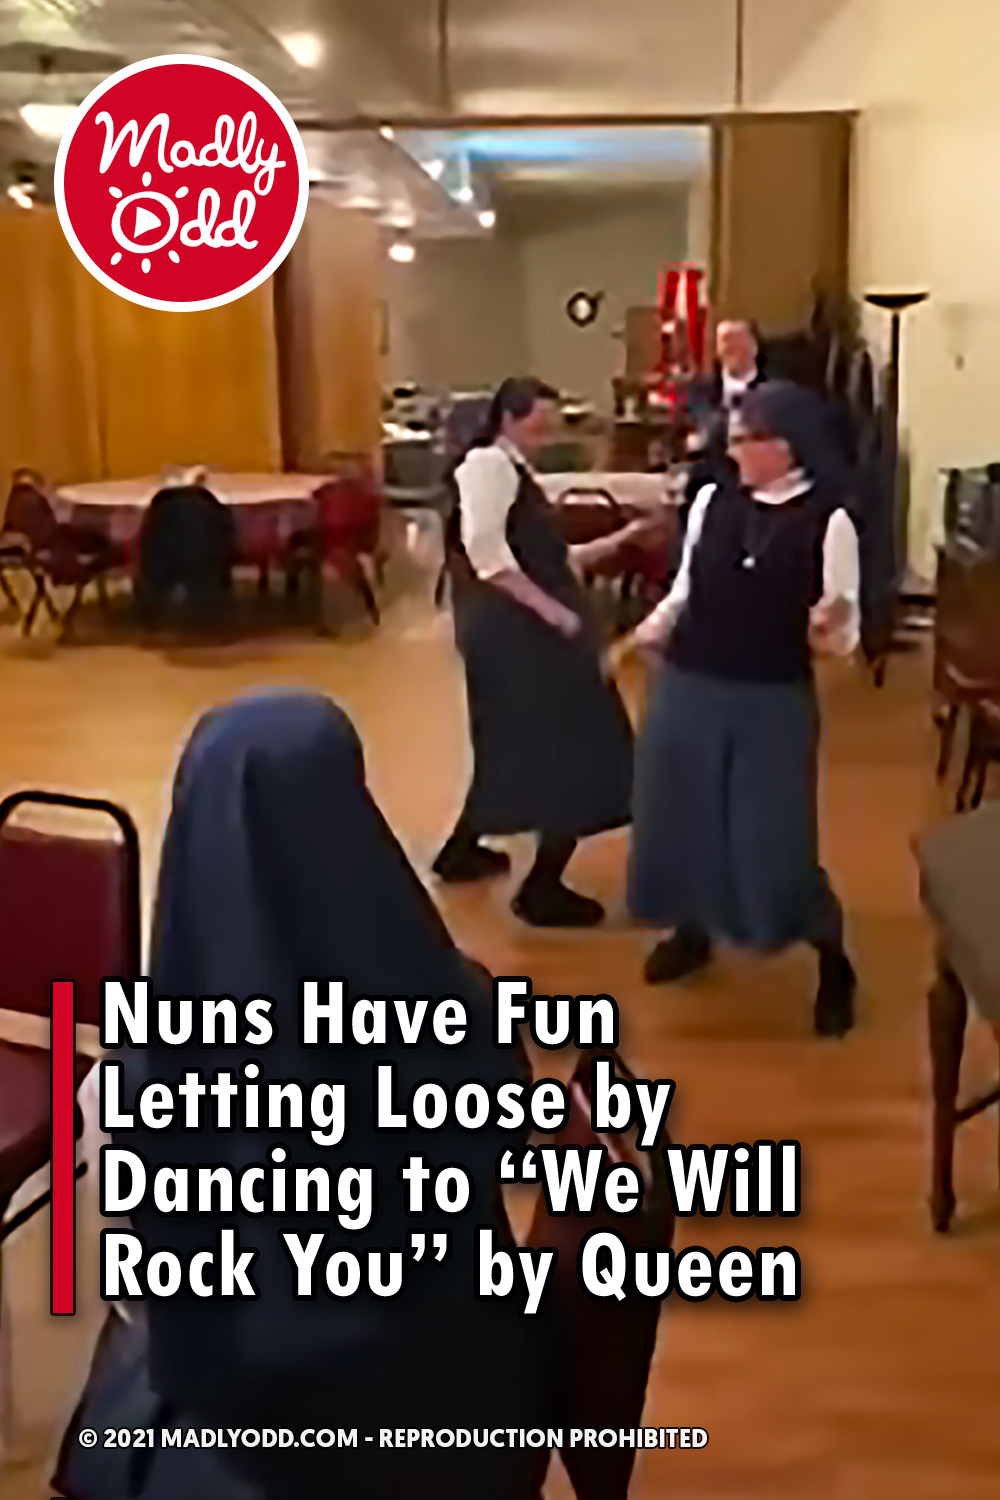 Nuns Have Fun Letting Loose by Dancing to “We Will Rock You” by Queen